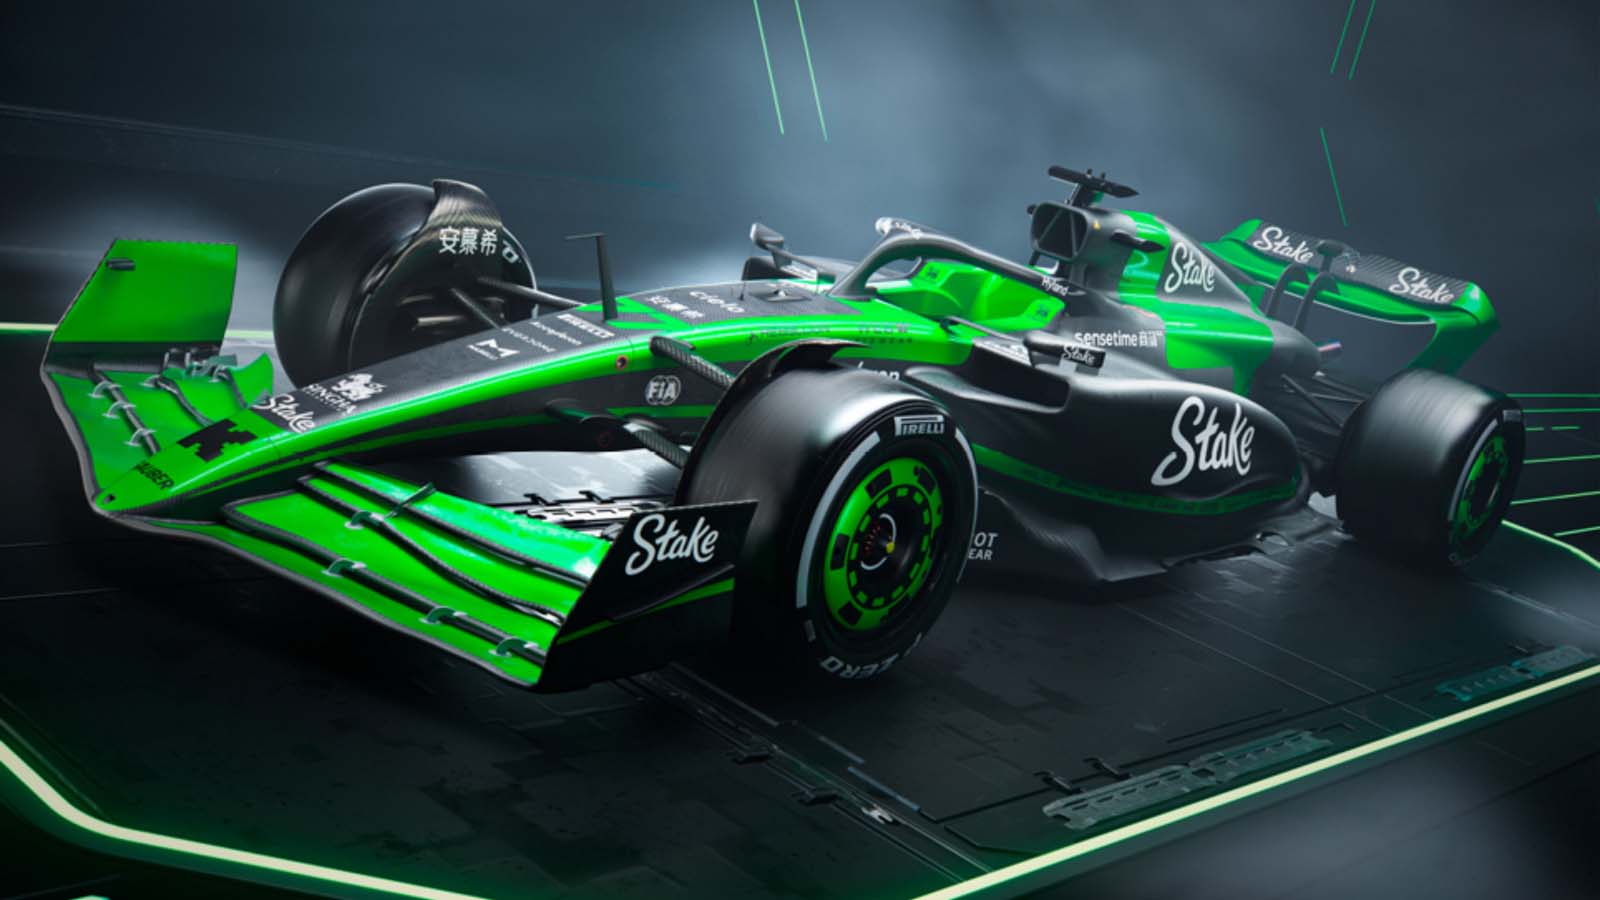 Stake F1 launch striking green colours as Sauber get new look for F1